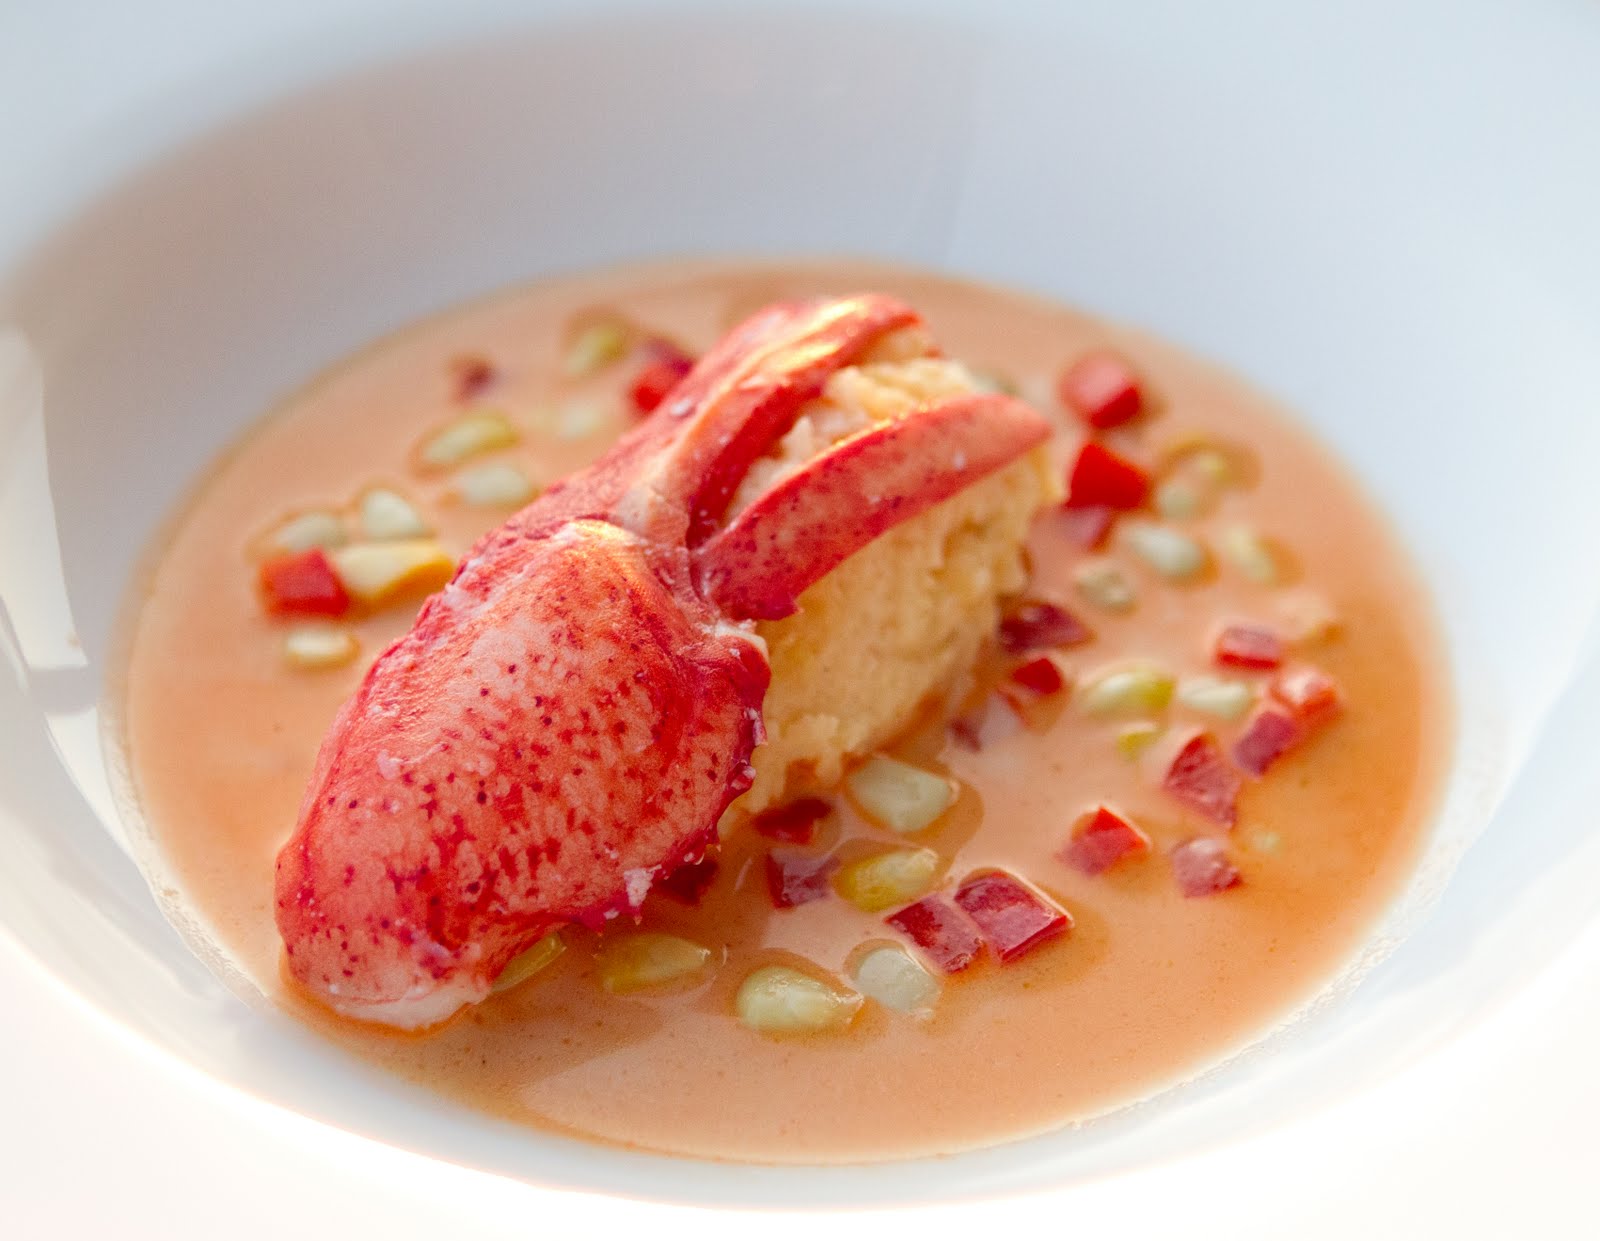 vide lobster claw with sauce Américaine | My Family Table